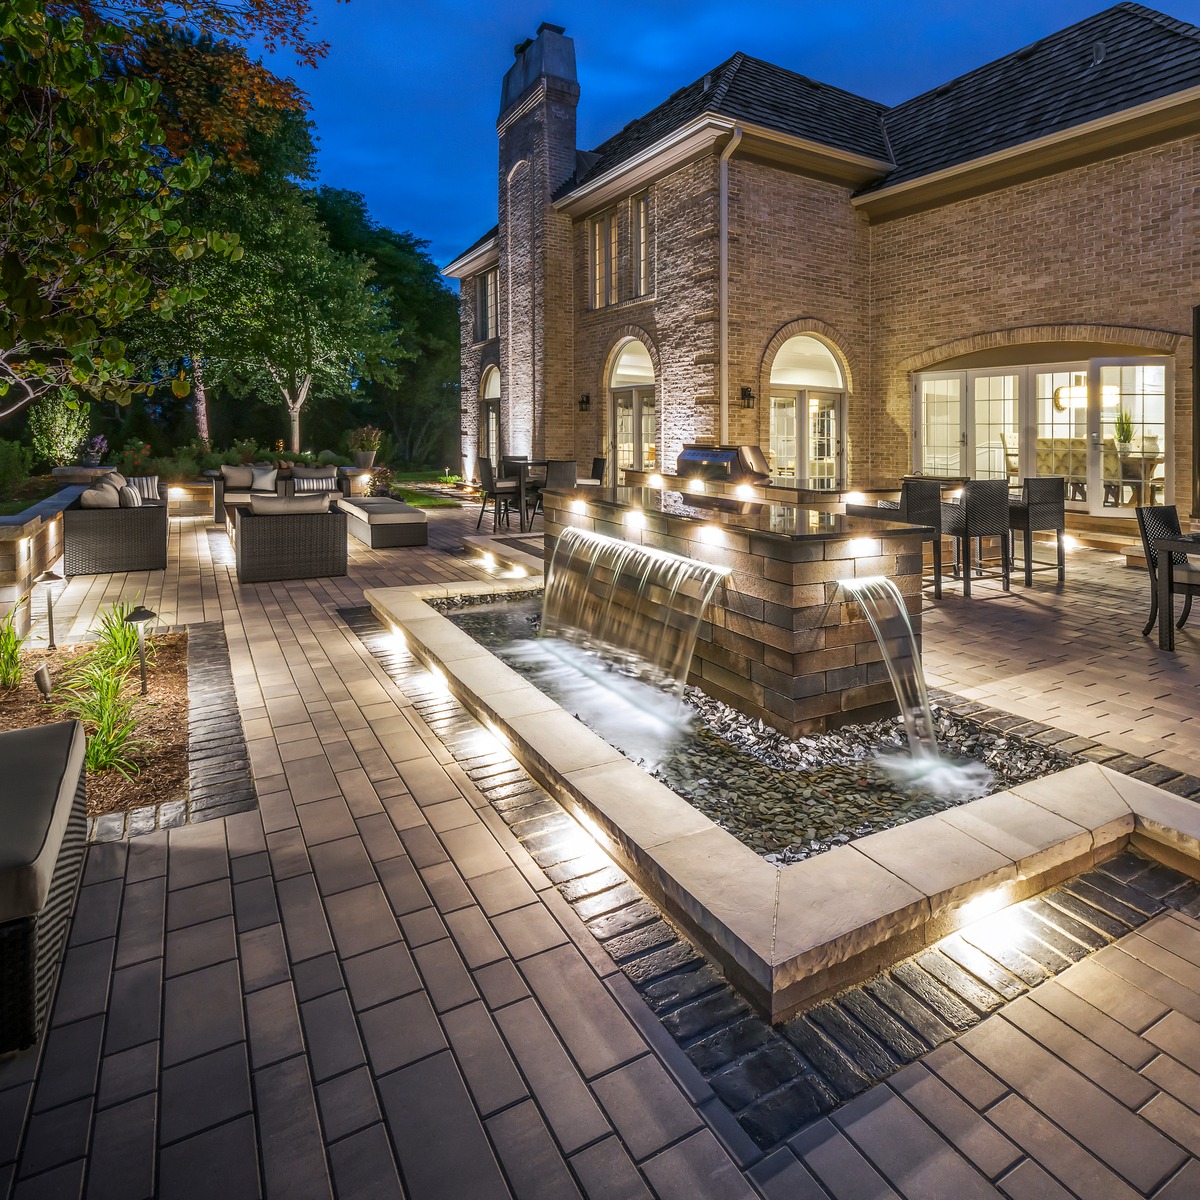 Paver Stone Patio with Water Feature and Patio Lighting